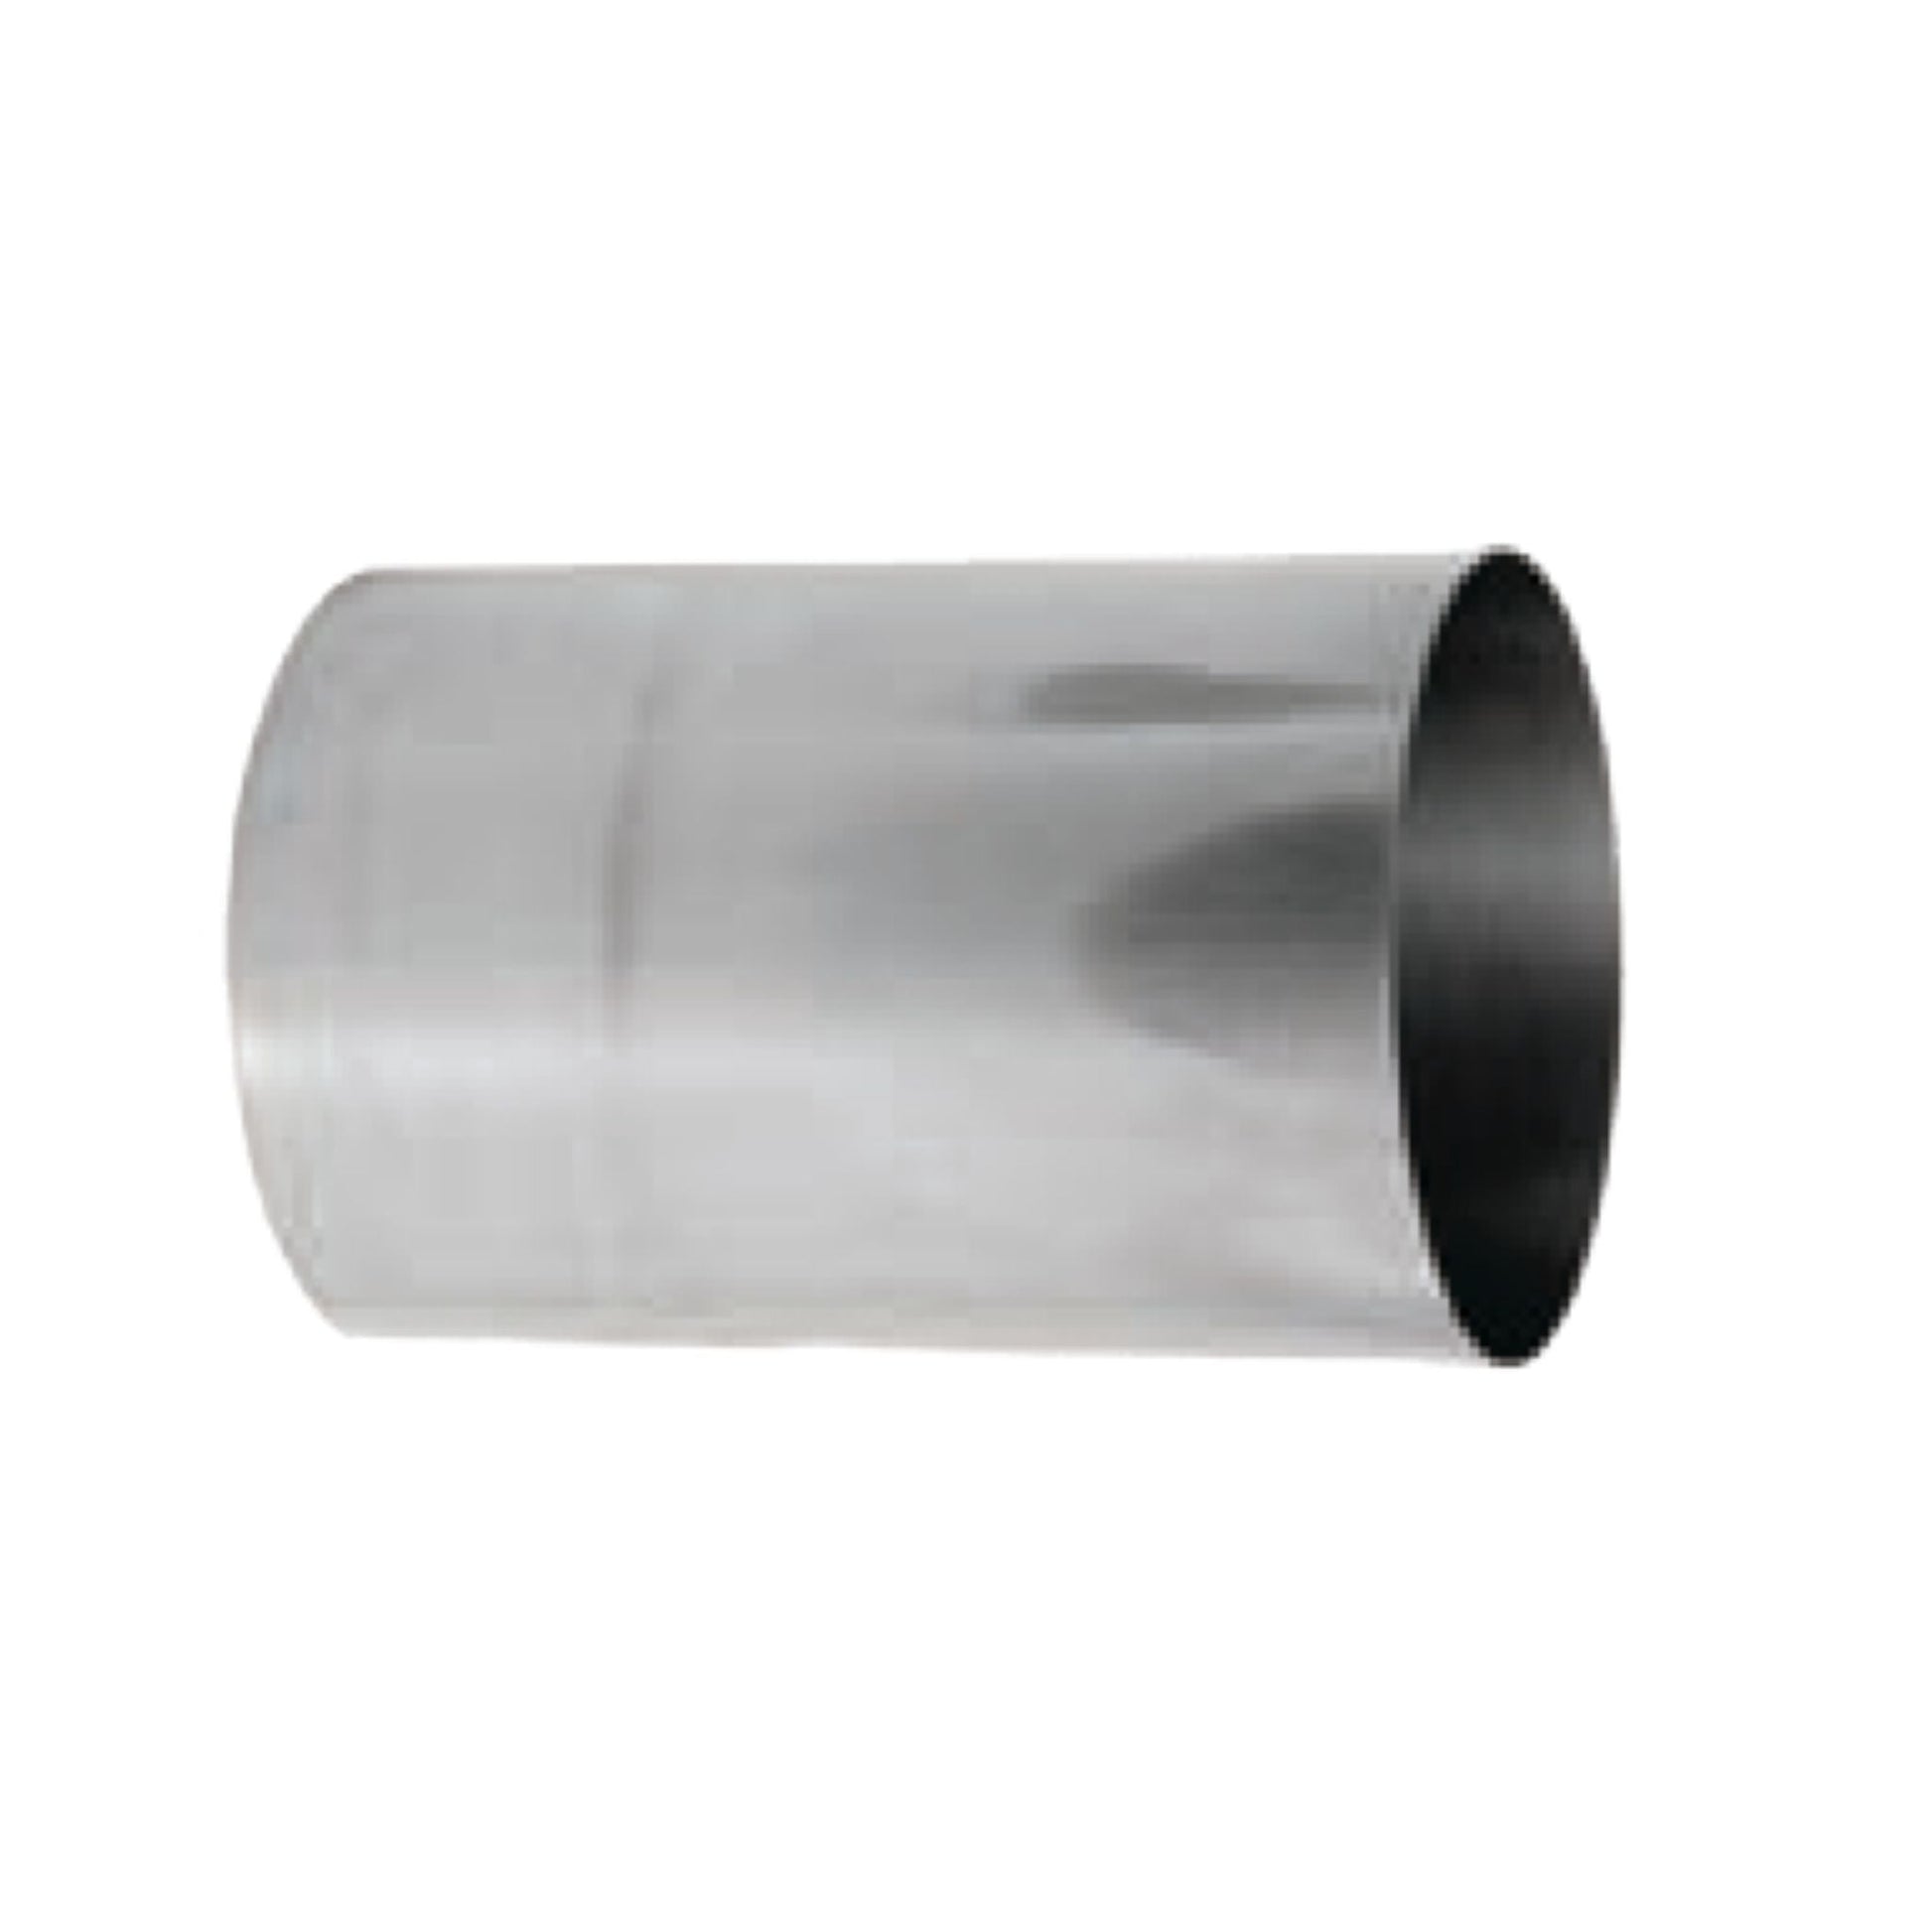 DuraVent FasNSeal 3" 29-4C Stainless Steel Wall Thimble Sleeve Extension